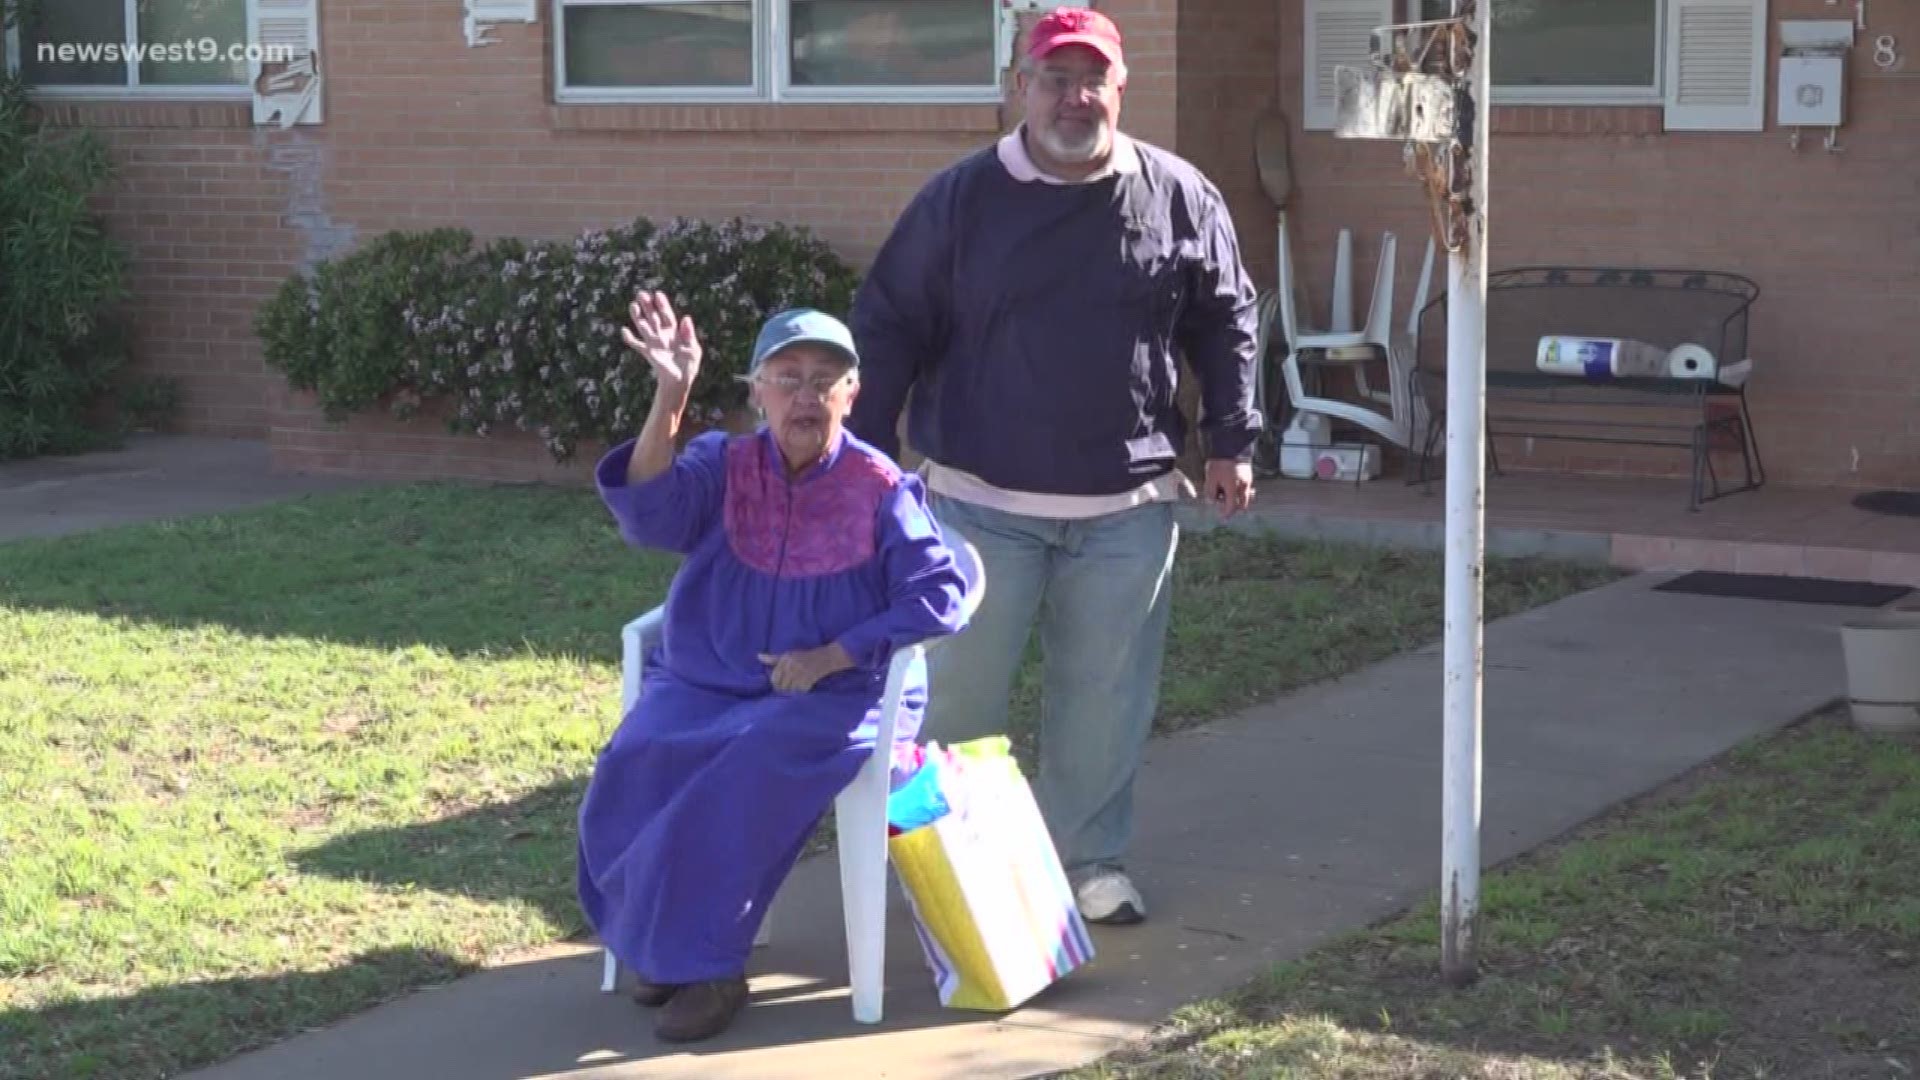 Gloria Hernandez has made it to 90, a milestone the community came out to celebrate.